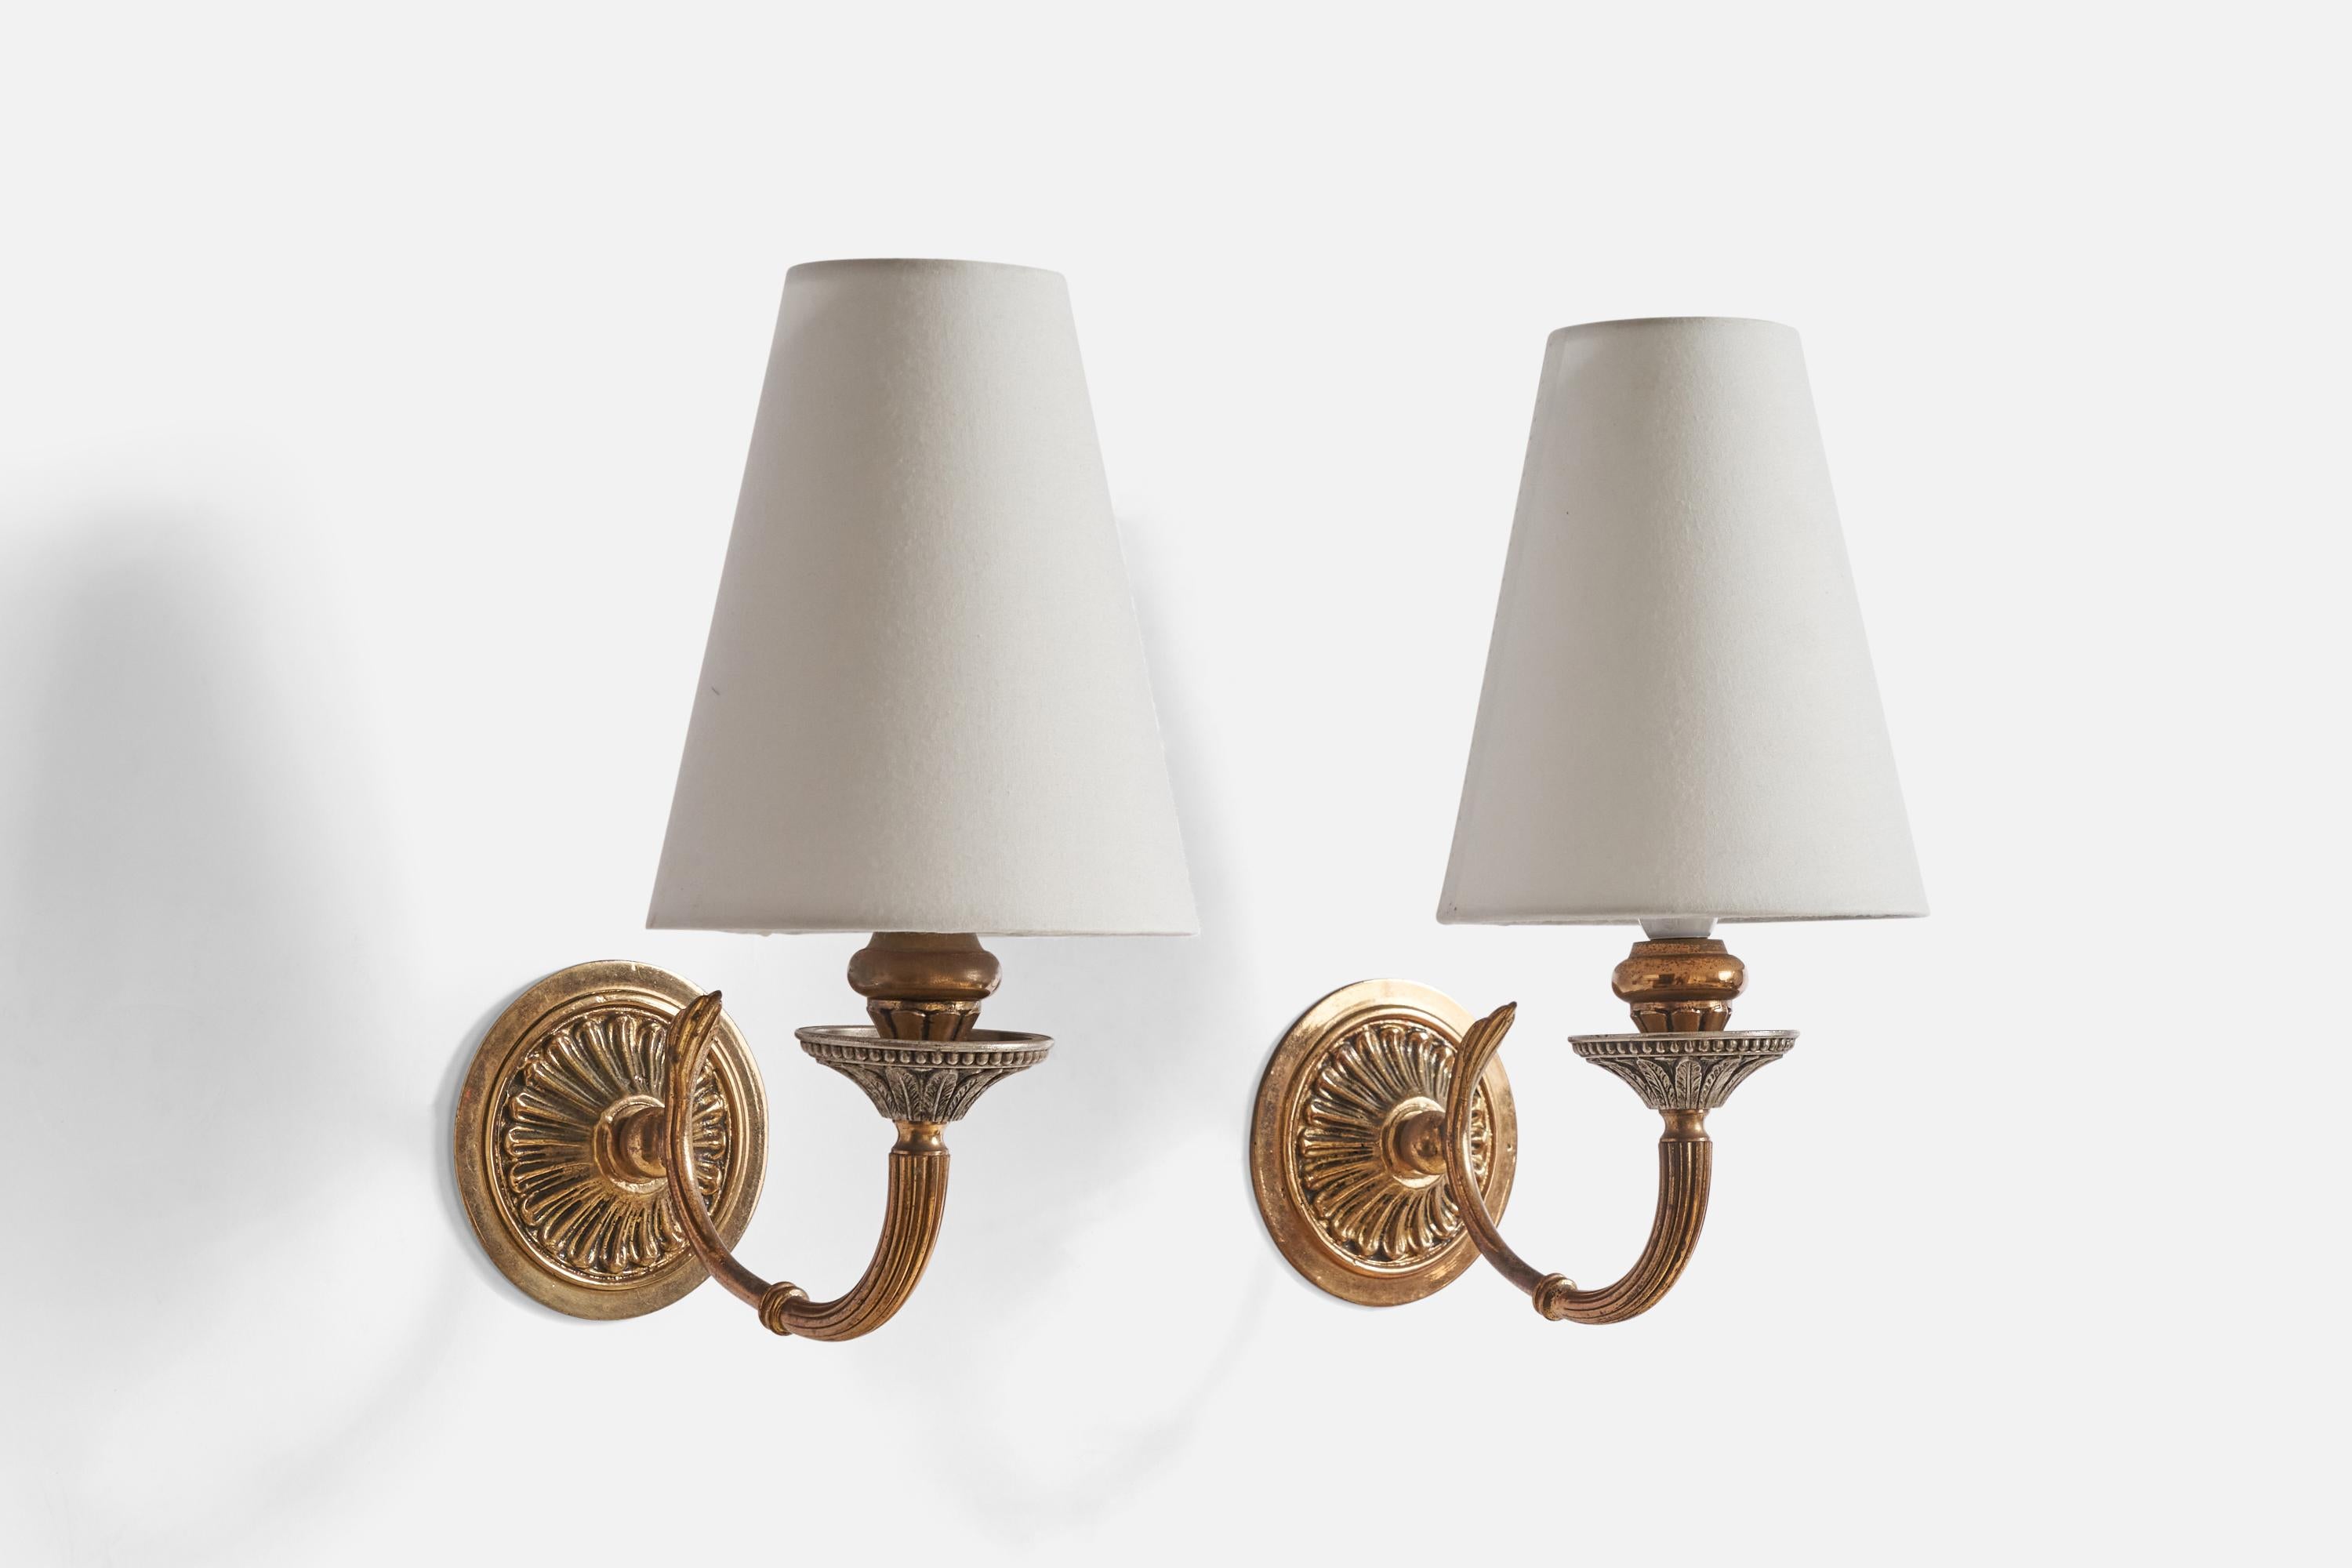 A pair of brass and metal wall lights designed and produced in Austria, c. 1940s.

Overall Dimensions (inches): 11” H x 5.5” W x 8.25”  D
Back Plate Dimensions (inches): 3.75”  H x 3.75”  W x .25” D
Bulb Specifications: E-14 Bulb
Number of Sockets: